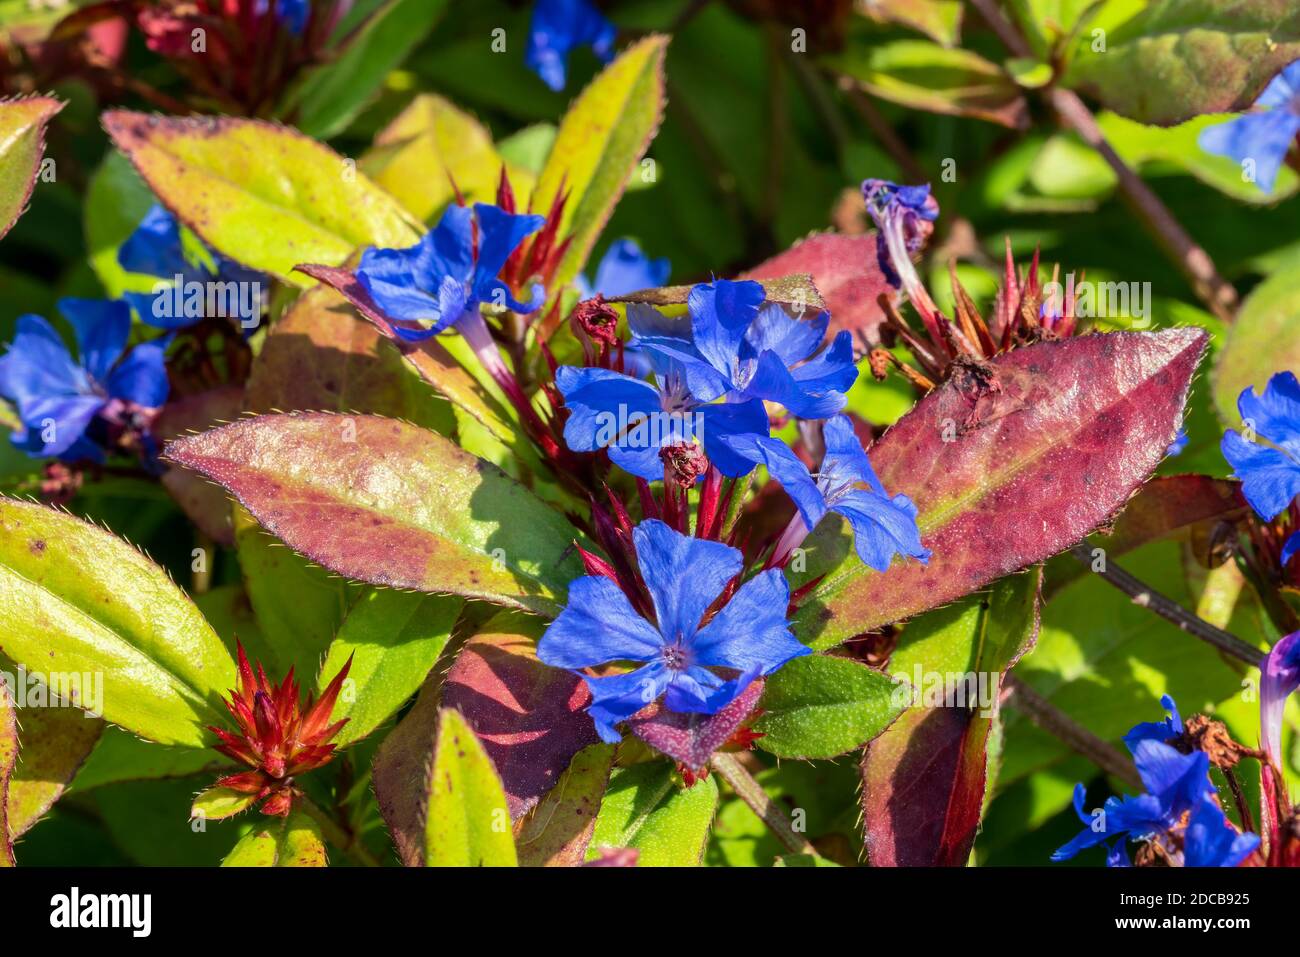 Ceratostigma plumbaginoides a summer autumn flower plant commonly known as blue flowered leadwort, stock photo image Stock Photo